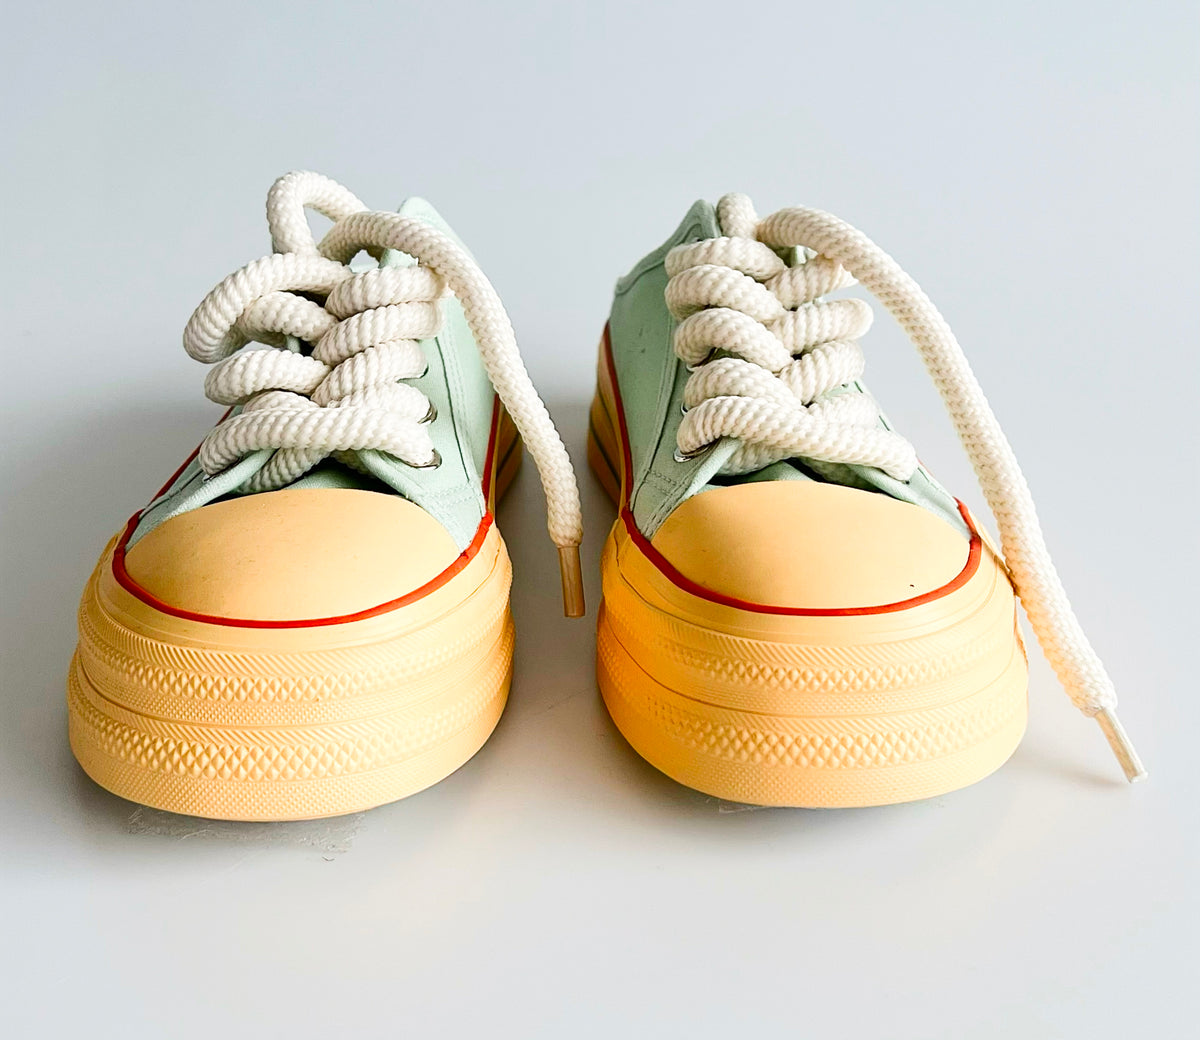 Classic Platform Sneakers - Mint Green-250 Shoes-Chasing Bandits-Coastal Bloom Boutique, find the trendiest versions of the popular styles and looks Located in Indialantic, FL